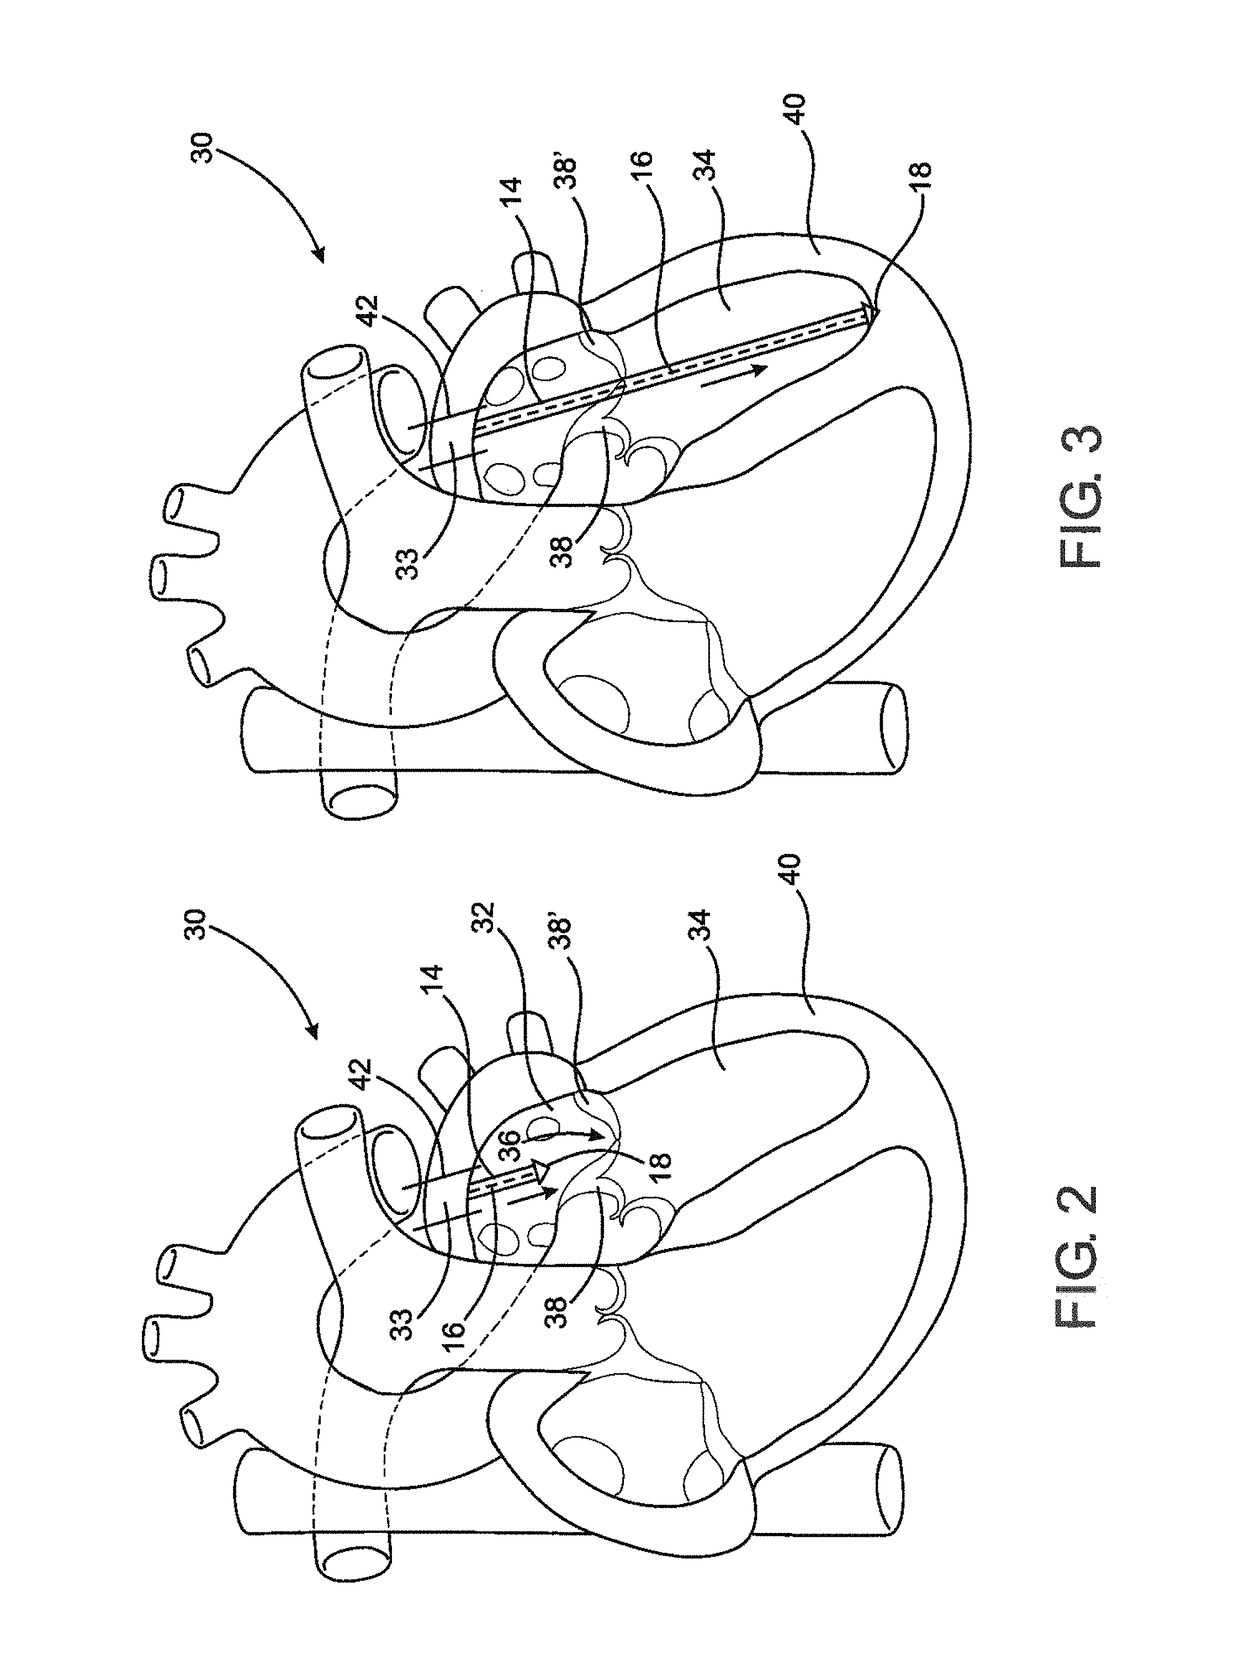 Device and method of treating heart valve malfunction